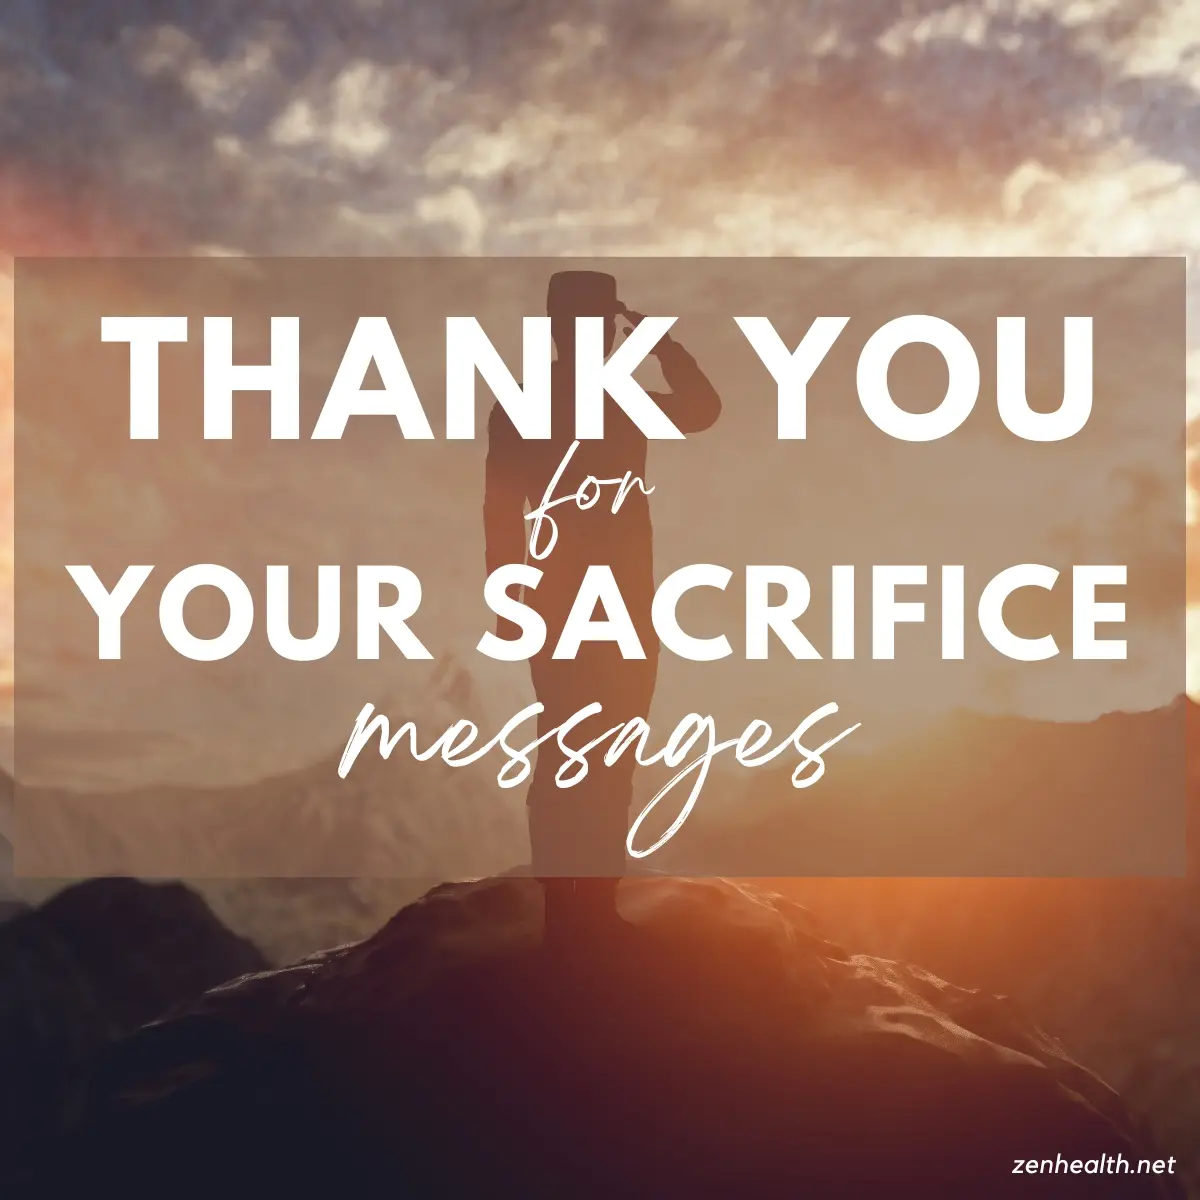 thank you for your sacrifice messages text overlay on a photo of a military personnel saluting